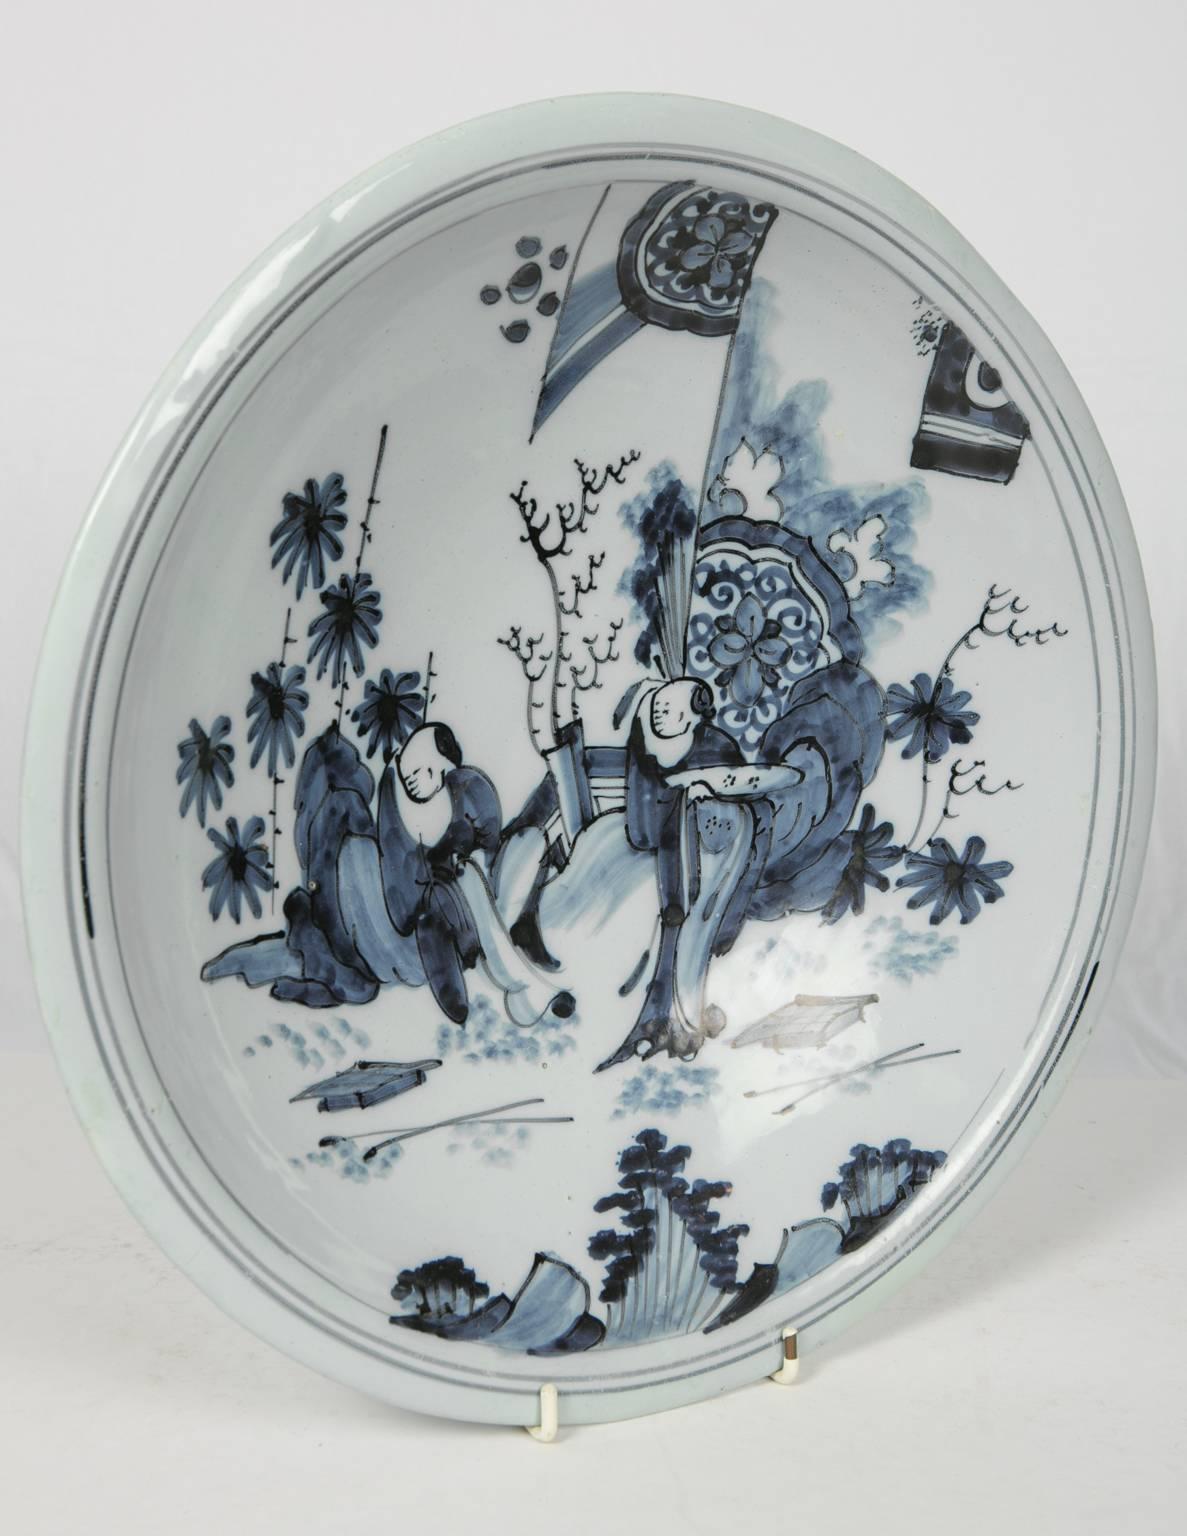 Dutch Blue and White Delft Charger with Chinese Inspired Scene Made circa 1640-1650